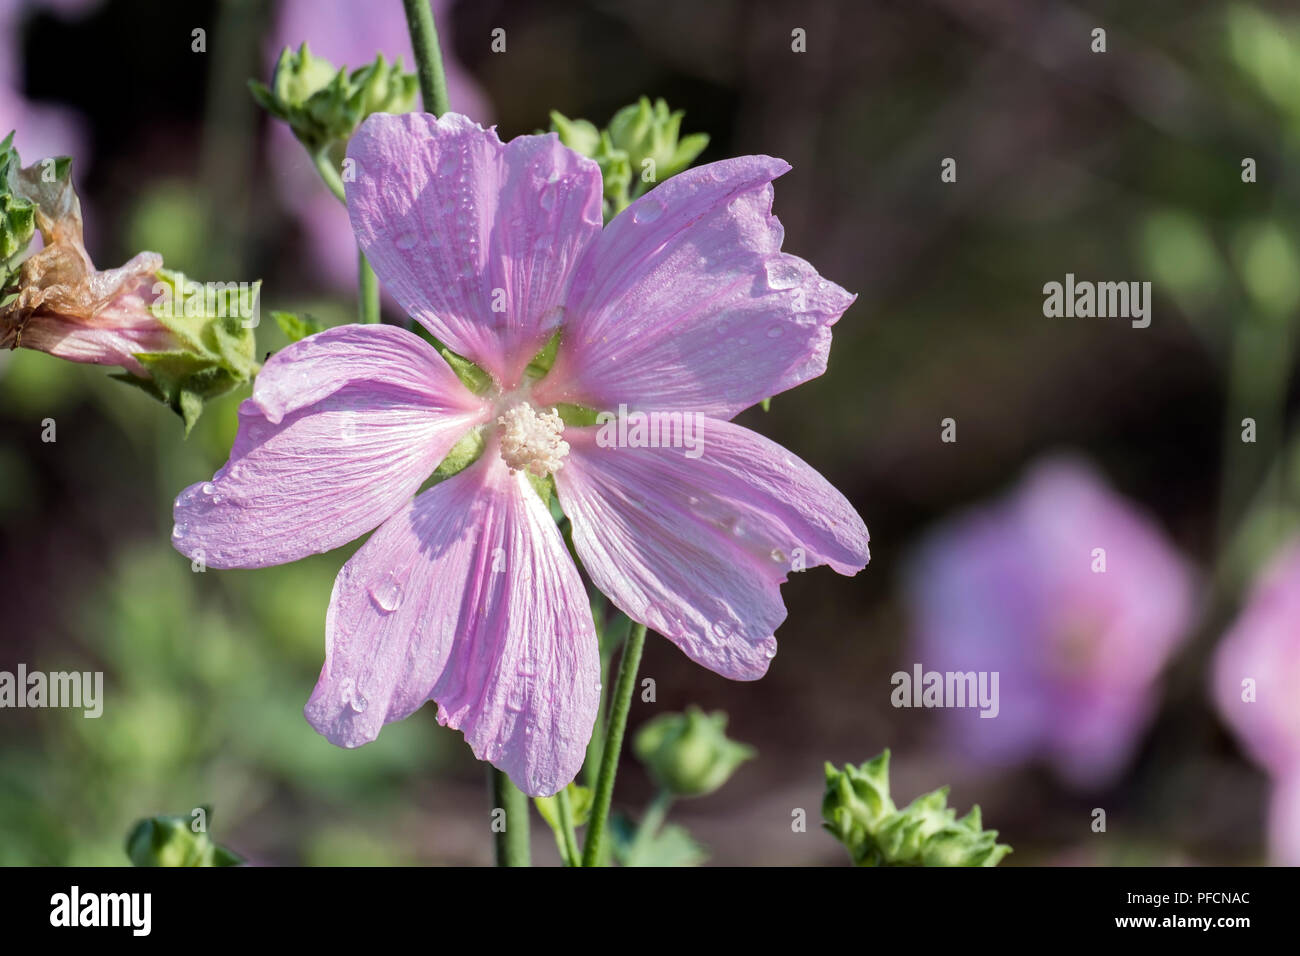 Flower of garden tree-mallow with droplets of dew on the petals (Lavatera thuringiaca) Stock Photo